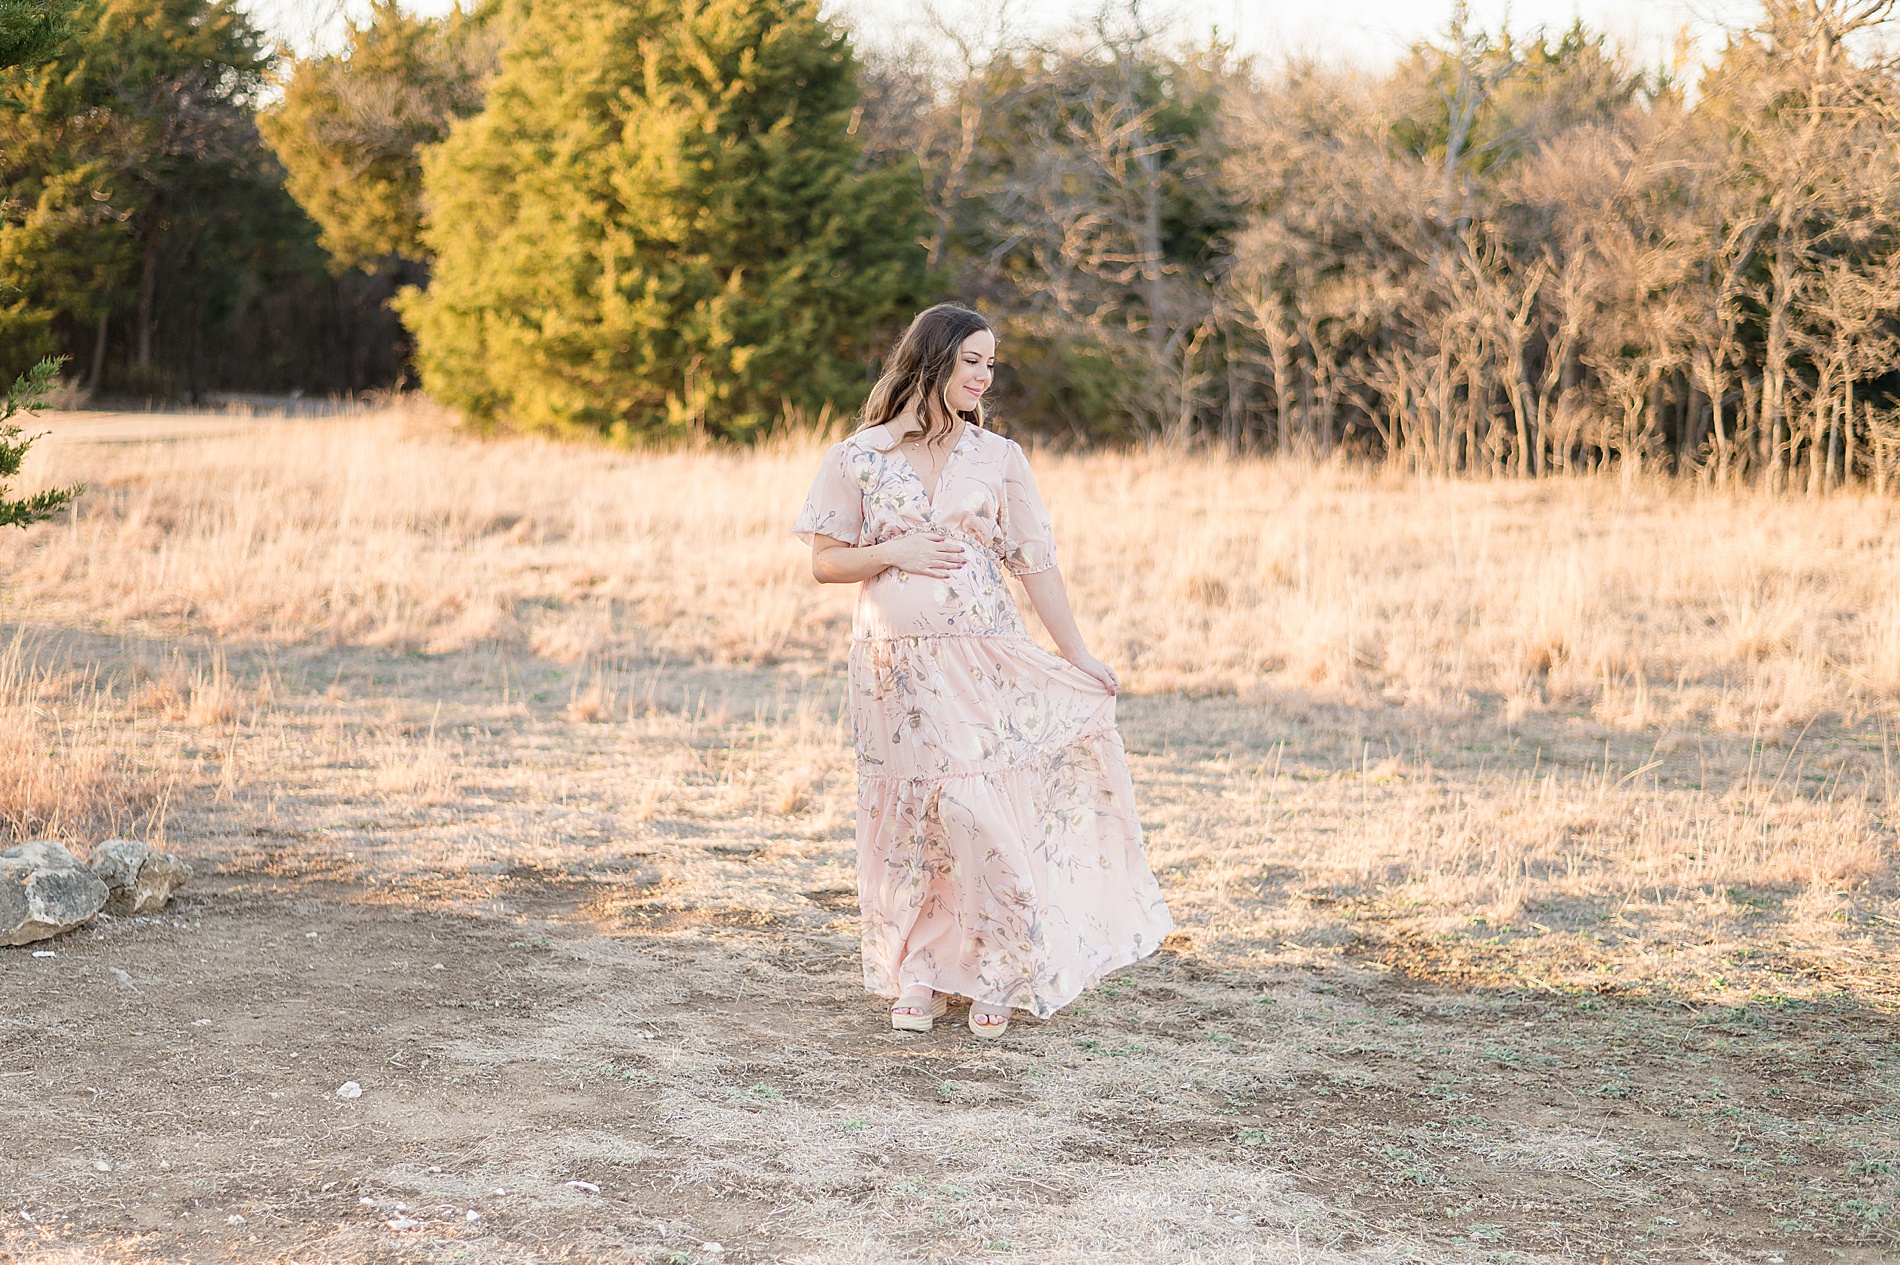 Arbor Hills maternity portraits photographed by Lindsey Dutton Photography, a Dallas Maternity photographer